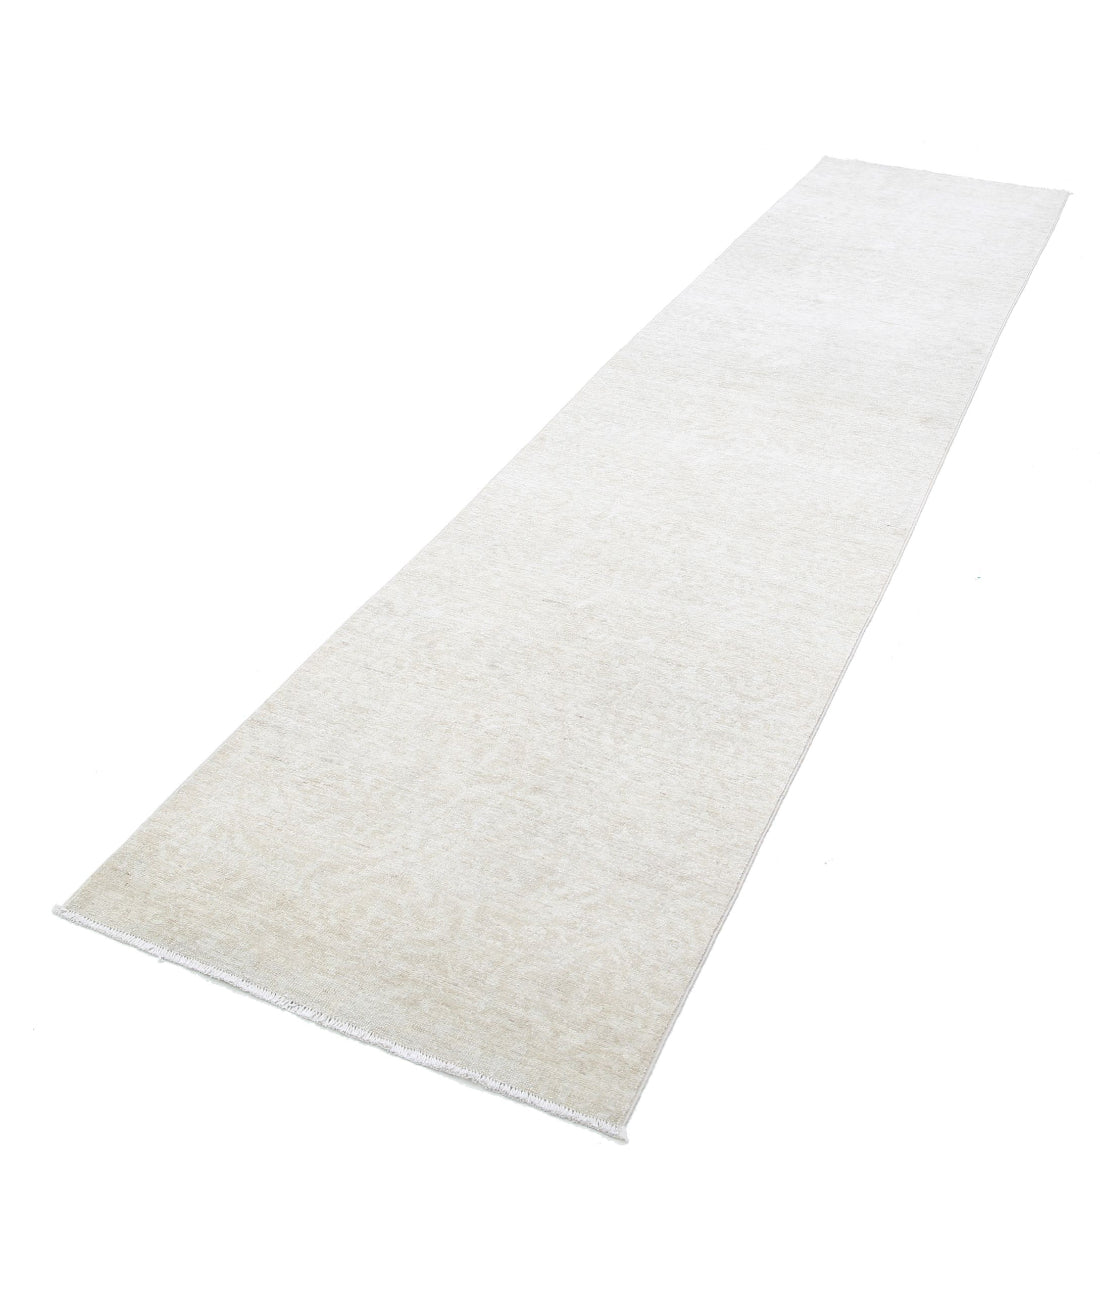 Hand Knotted Serenity Wool Rug - 2'9'' x 12'2'' 2'9'' x 12'2'' (83 X 365) / Ivory / Ivory